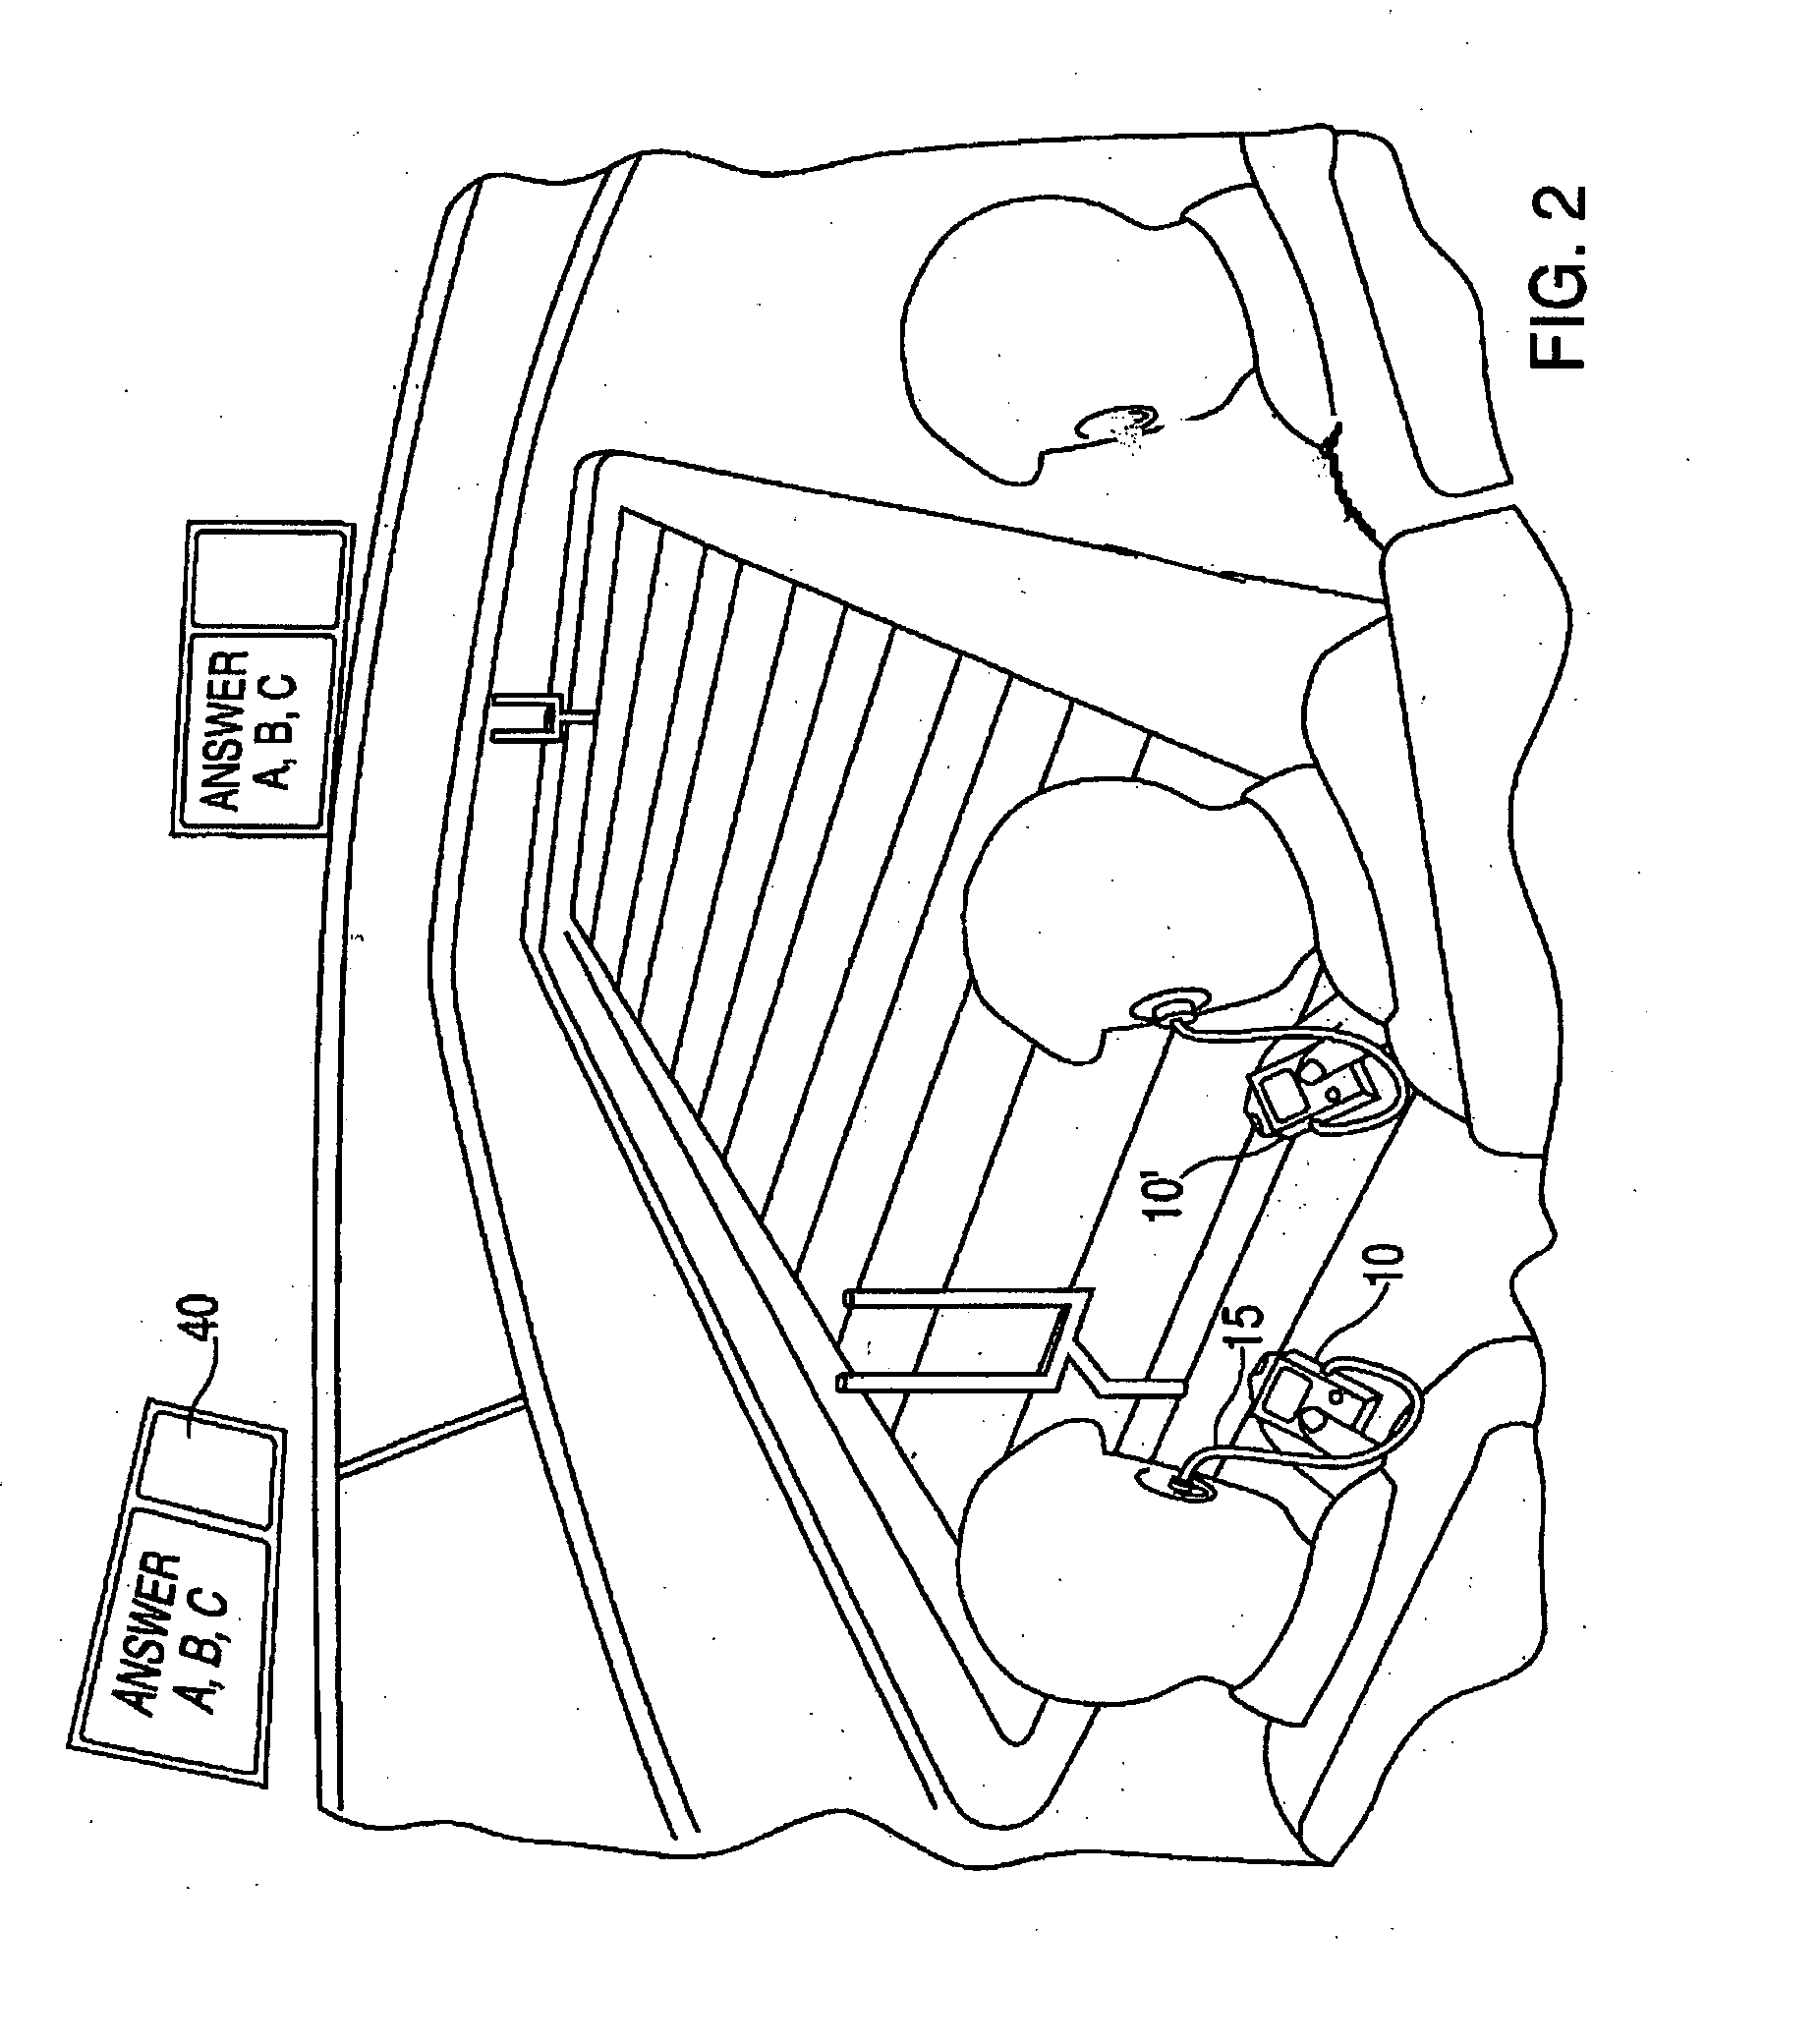 Method and apparatus for interactive audience participation at a live entertainment event